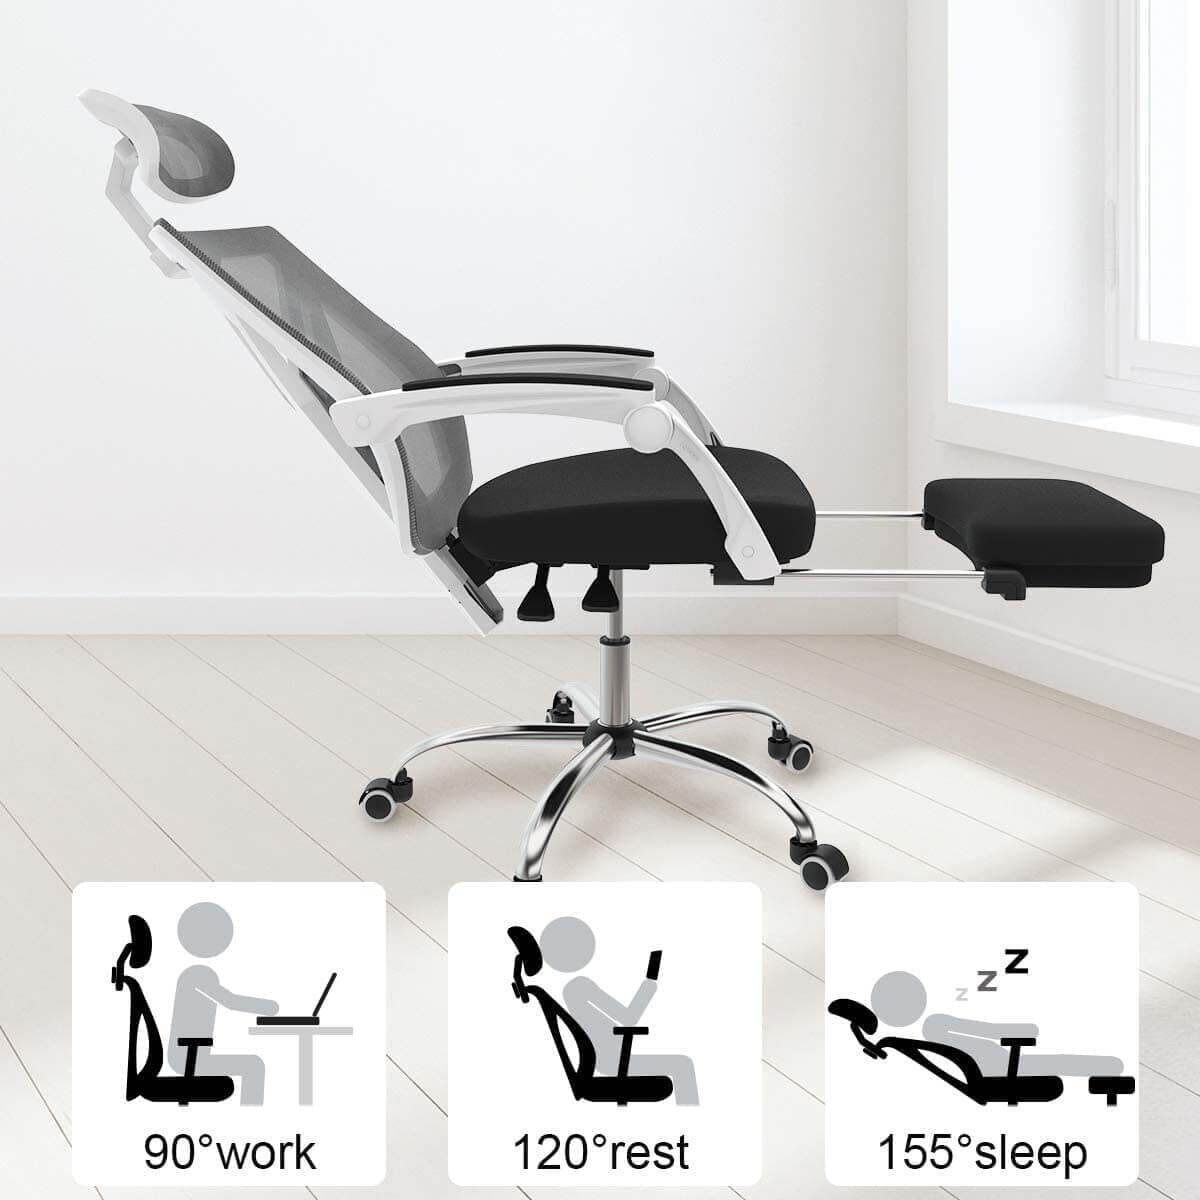 Recliner High Back Ergonomic Office Chair by Hbada (Function)